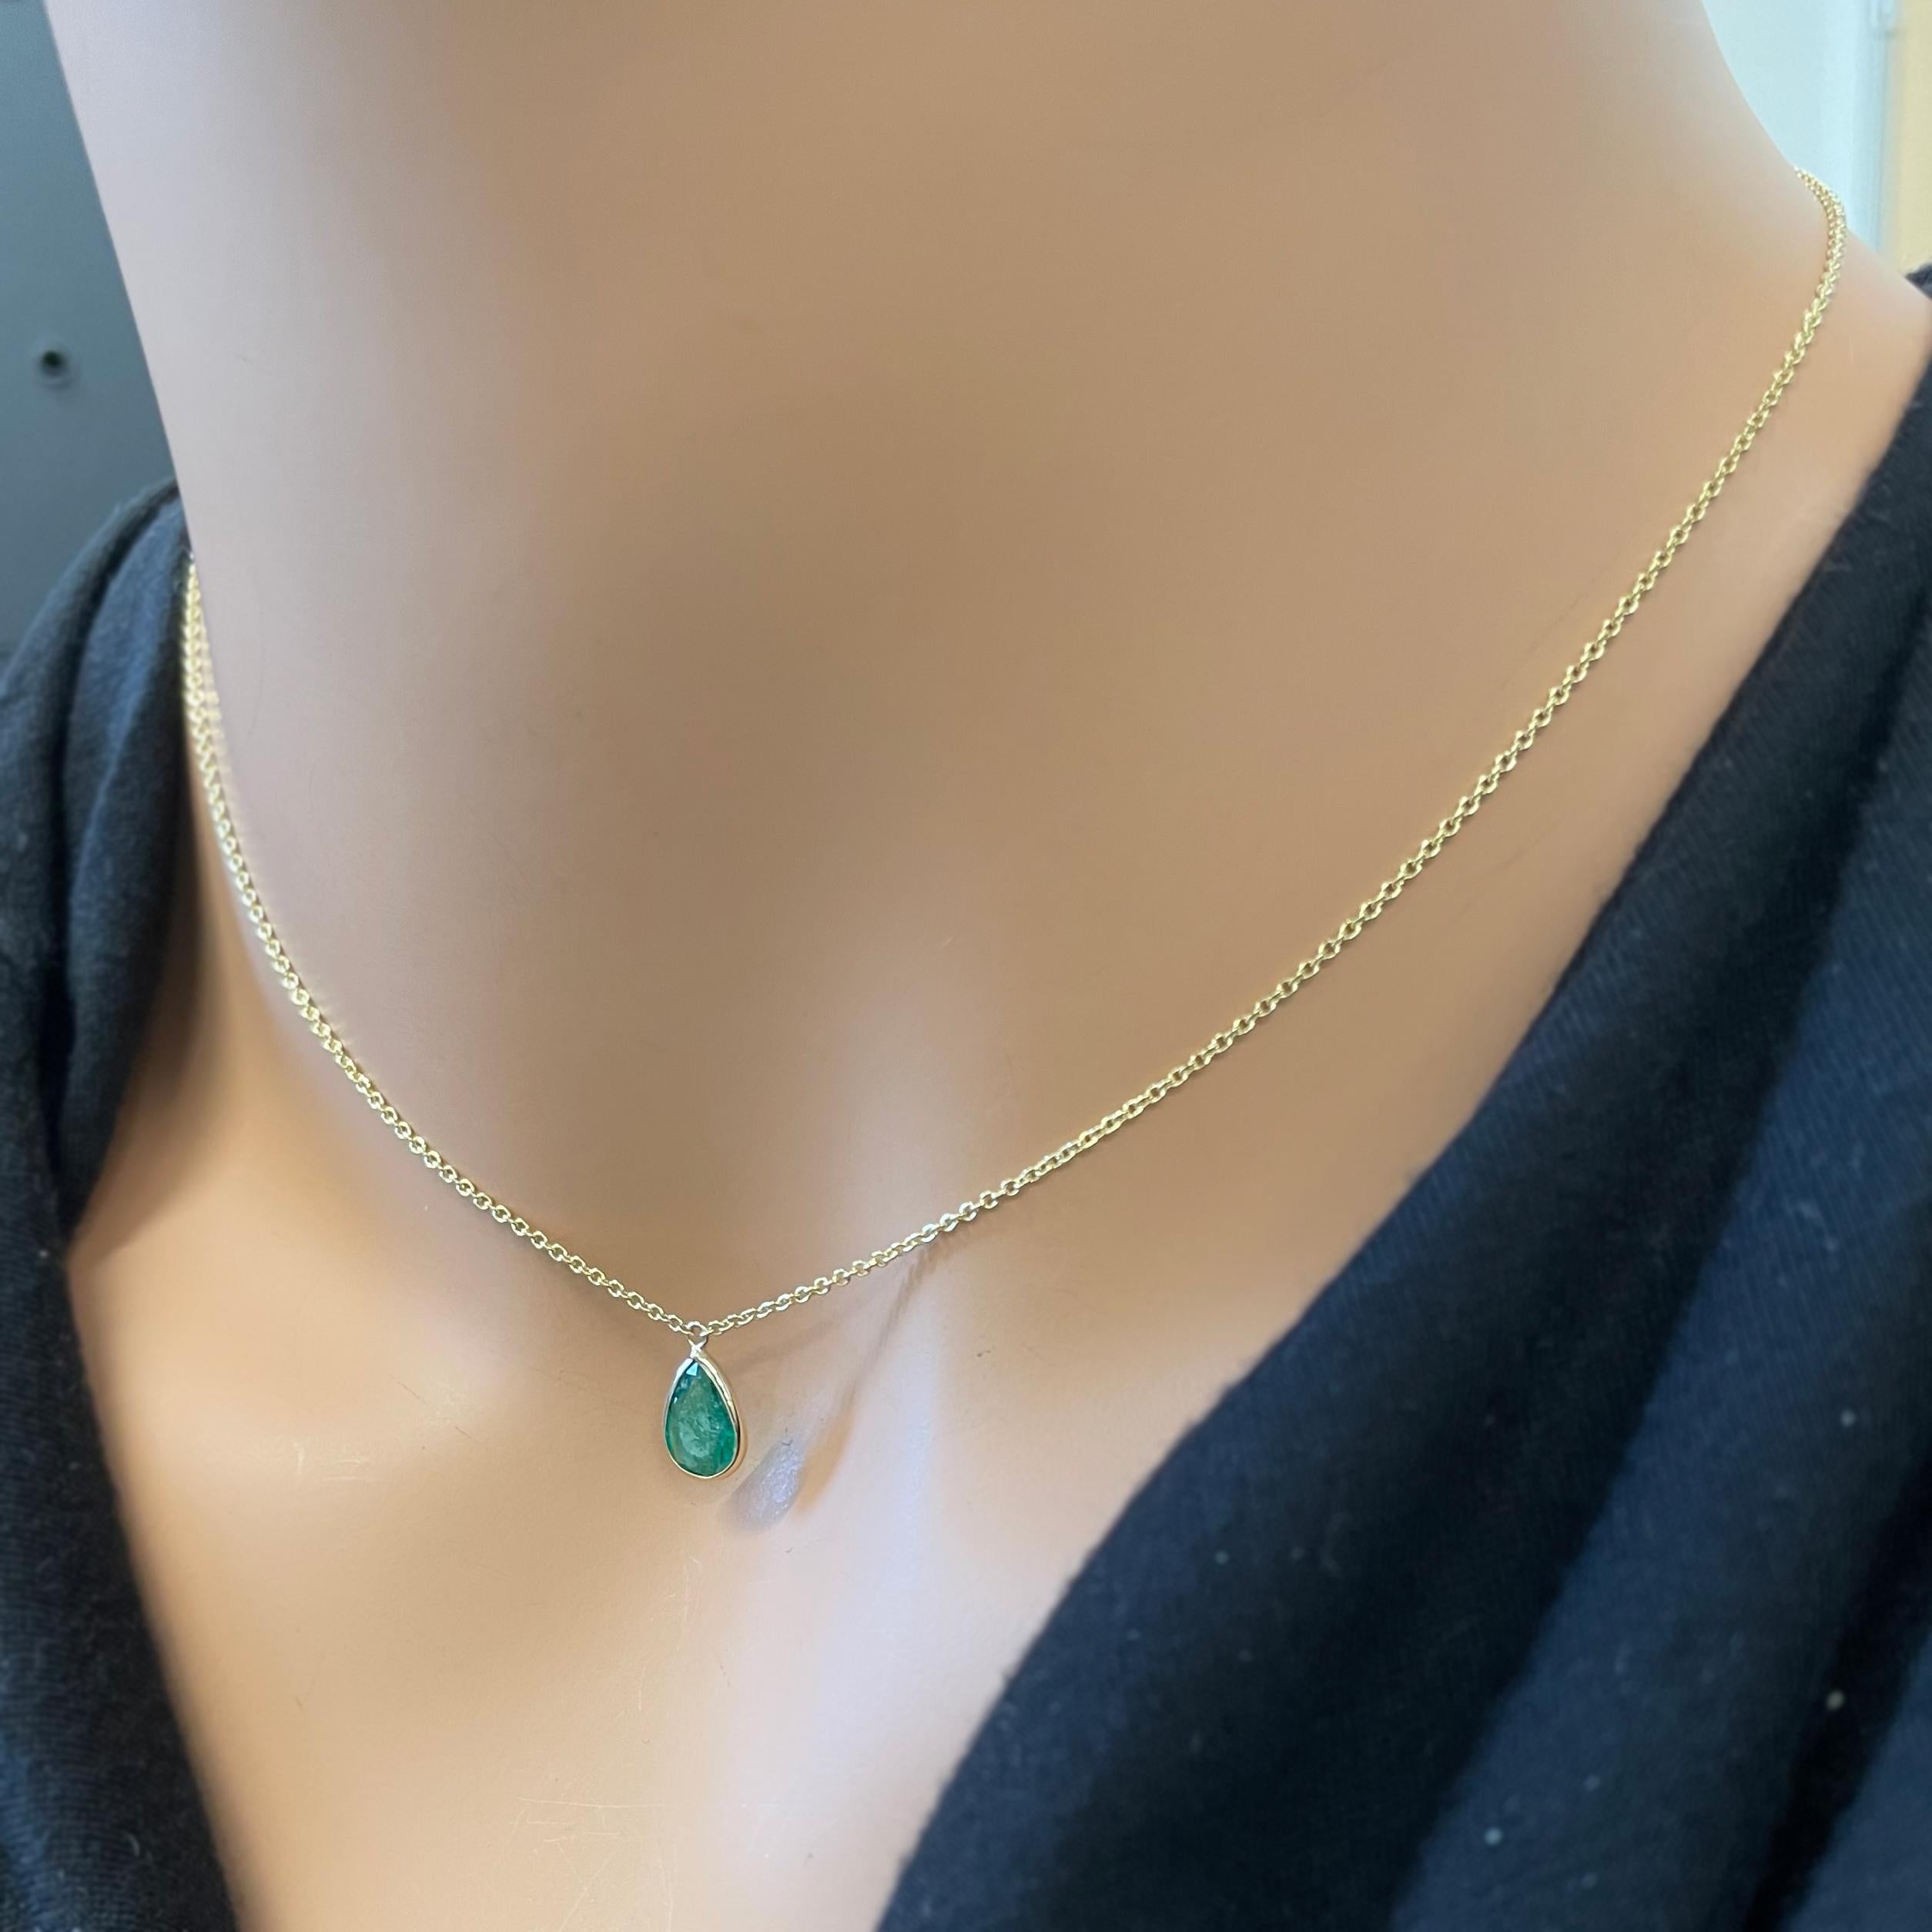 This necklace features a pear-cut green emerald with a weight of 1.10 carats, set in 14k yellow gold (YG). Emeralds are highly prized for their rich green color, and the pear cut, with its distinctive teardrop shape, adds an elegant and unique touch